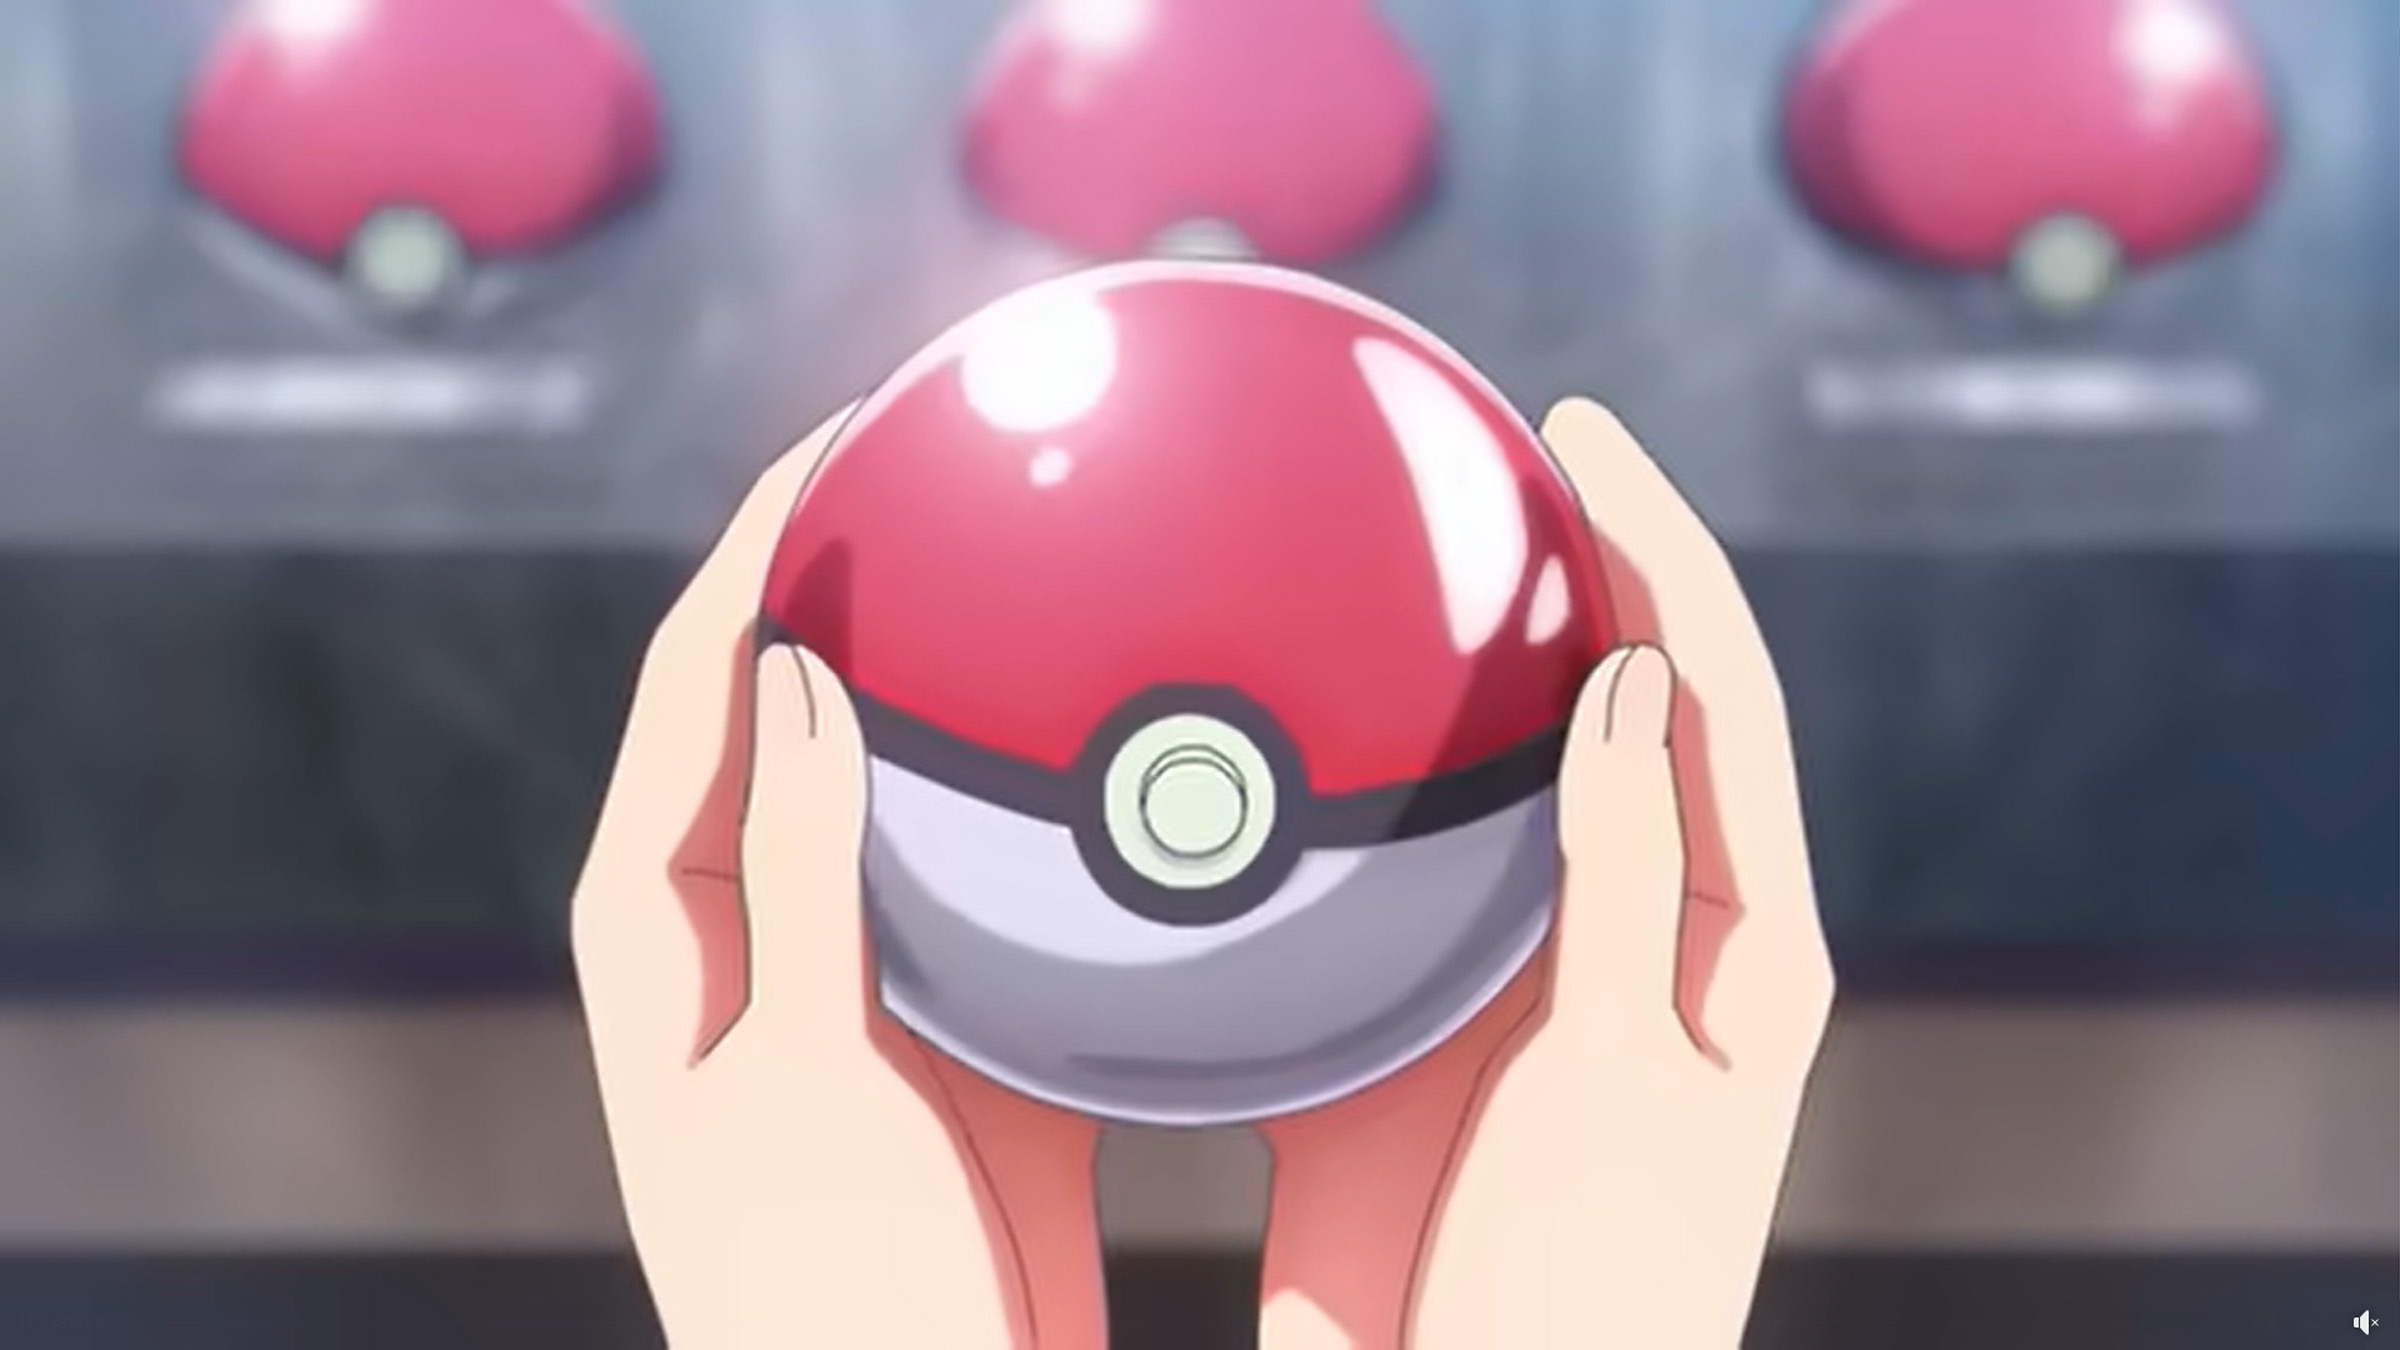 Pokémon Reveals Major Changes For The Anime With Finale For Ash Ketchum and  Pikachu In 2023 - The Illuminerdi